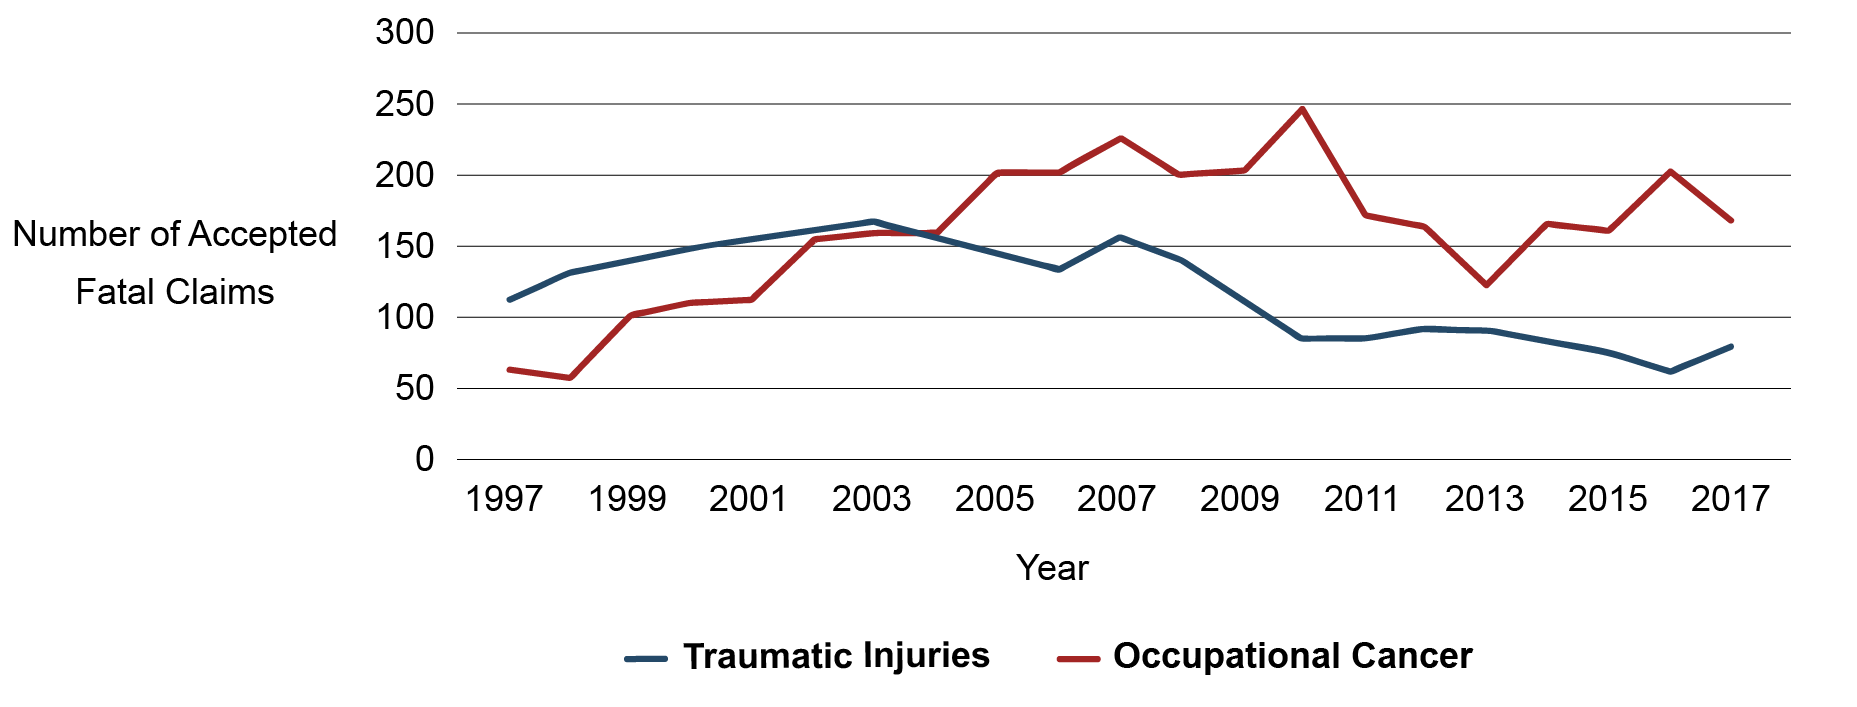 Figure 2 is a graph that shows the number of accepted fatal claims, for both injuries and occupational cancer. In 1997, the number of accepted fatality claims due to traumatic injury was just over 100; the number due to occupational disease was just over 50. In 2017, the number of accepted fatality claims due to traumatic injury had dropped to under 100, while the number due to occupational disease increased to more than 150. The chart shows that the number of accepted fatality claims due to occupational disease first surpassed the number due to traumatic injuries in 2004, and that it has remained higher ever since.